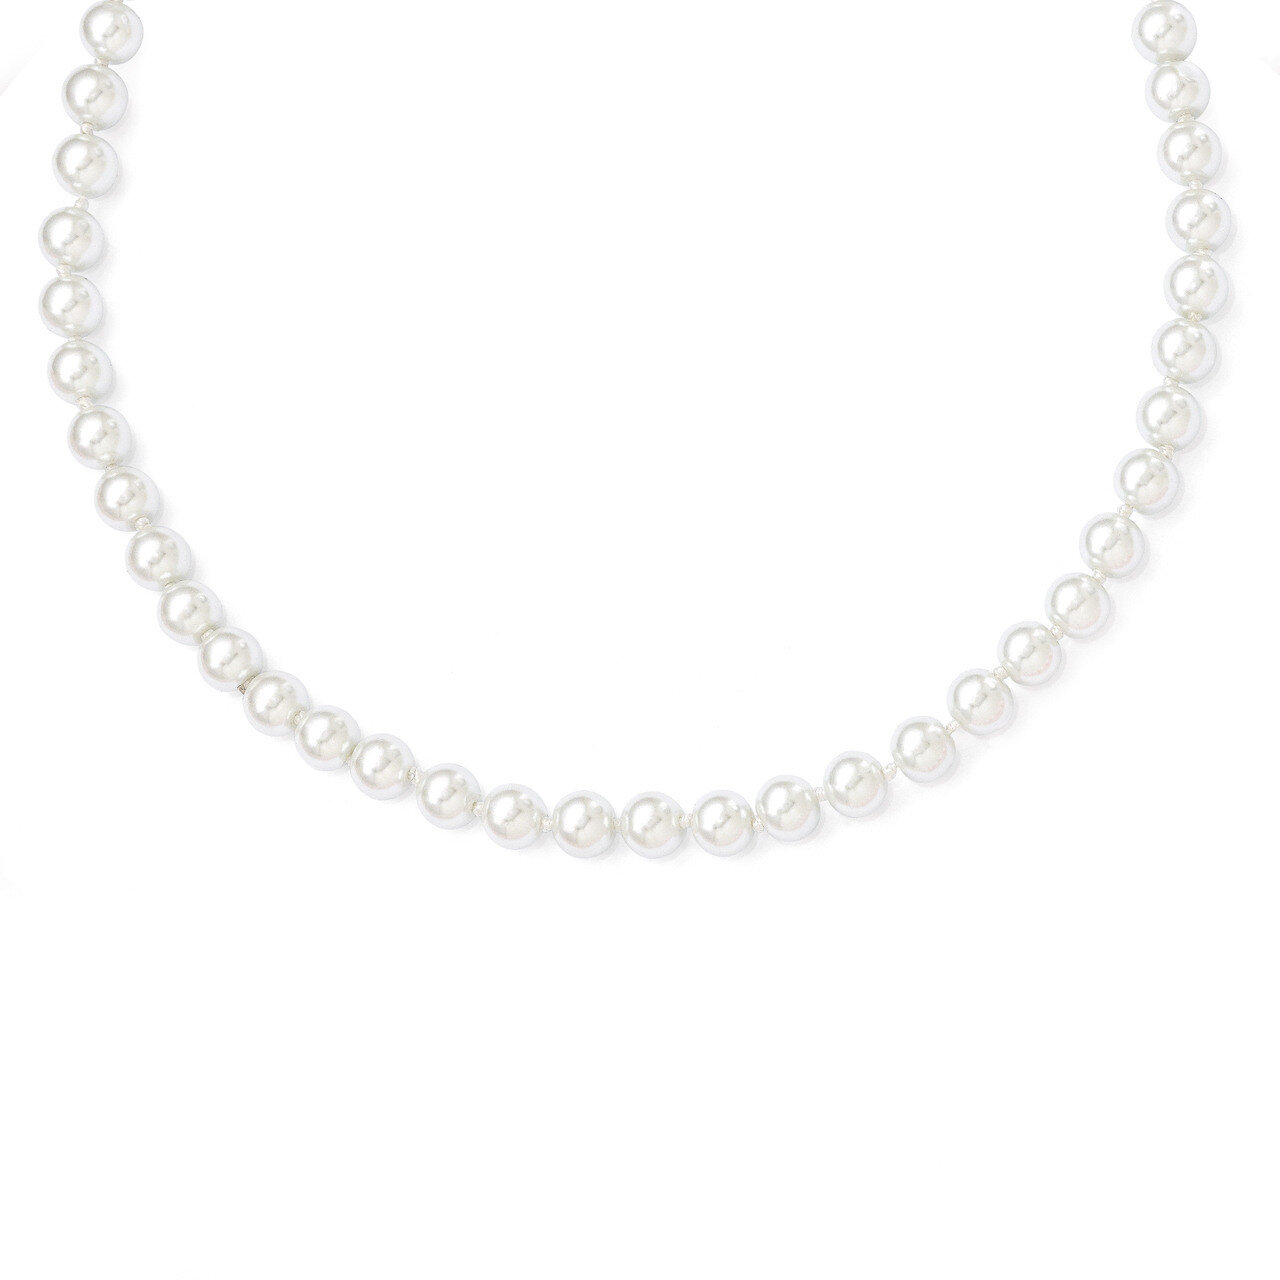 8mm 30in White Simulated Pearl Cord Necklace SRN1771